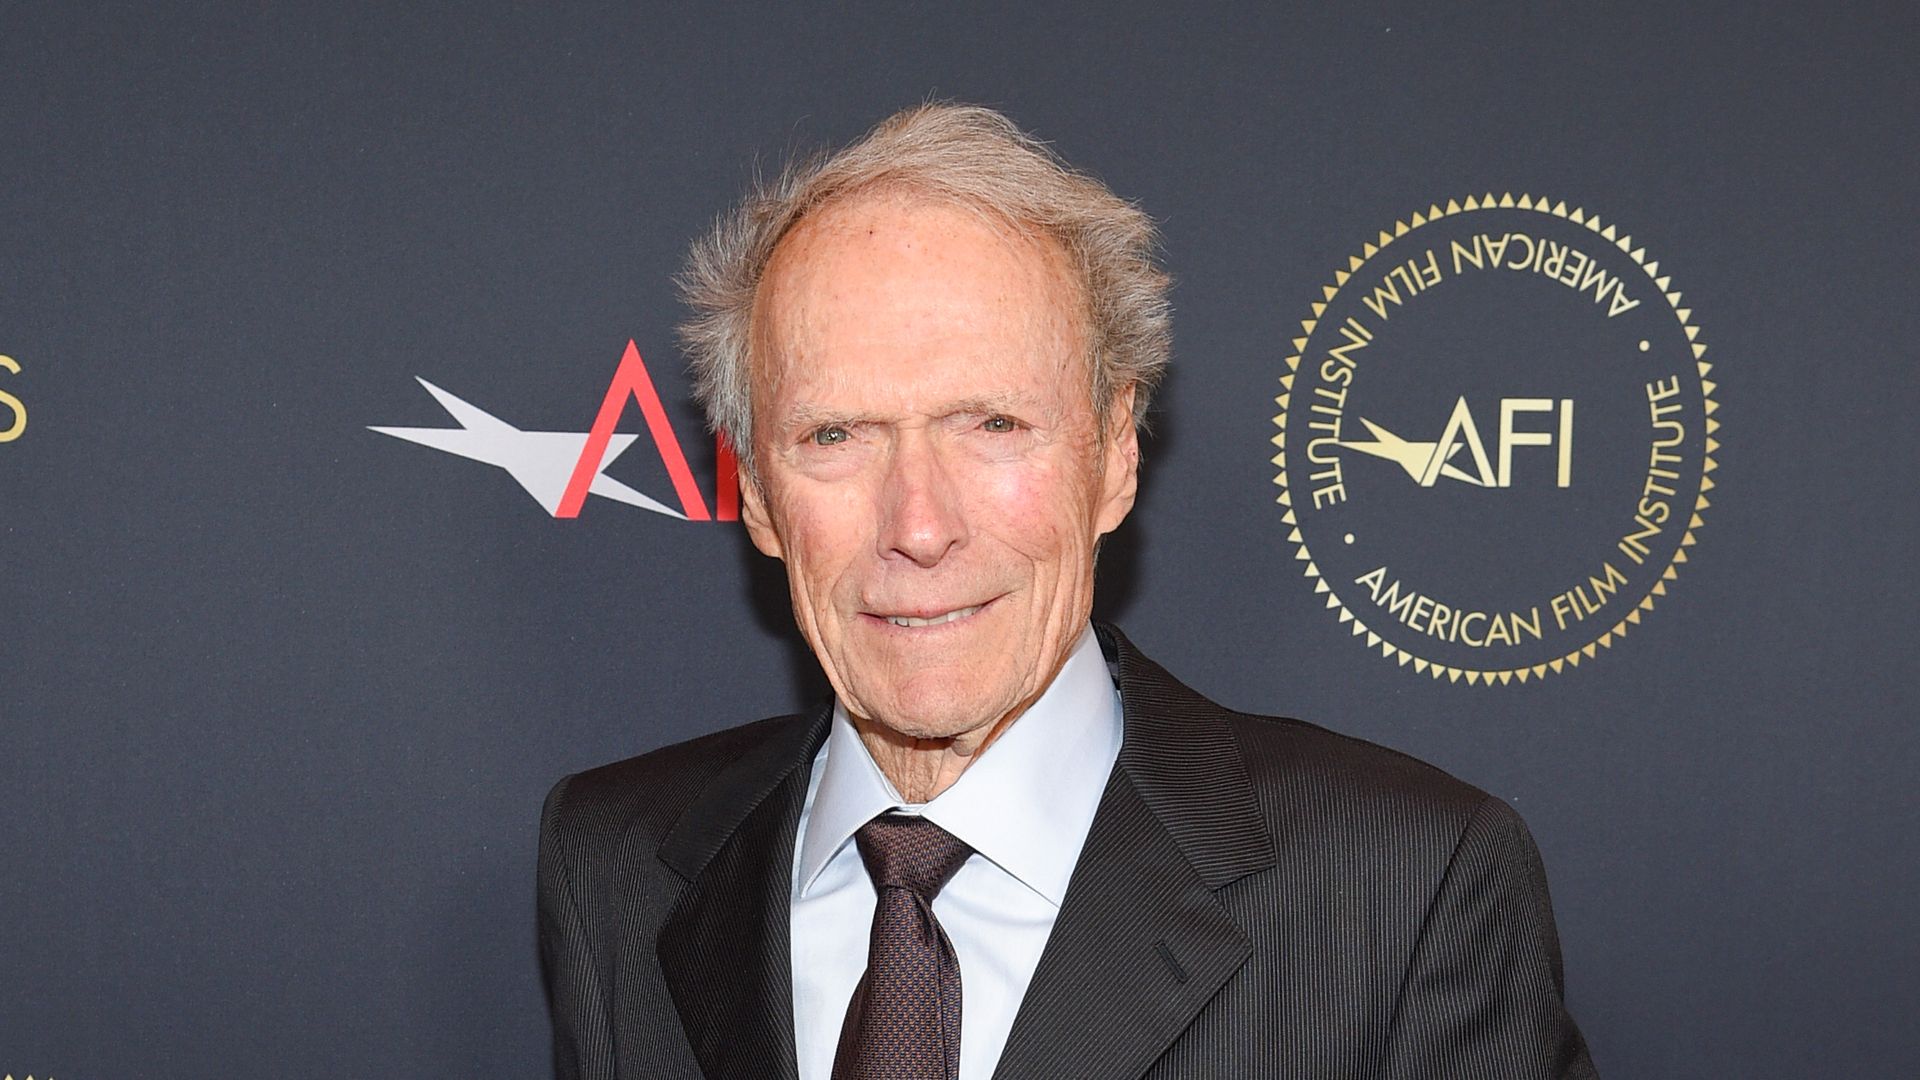 Clint Eastwood at the AFI Awards Luncheon, Arrivals, Four Seasons Hotel, Los Angeles, USA - 03 Jan 2020